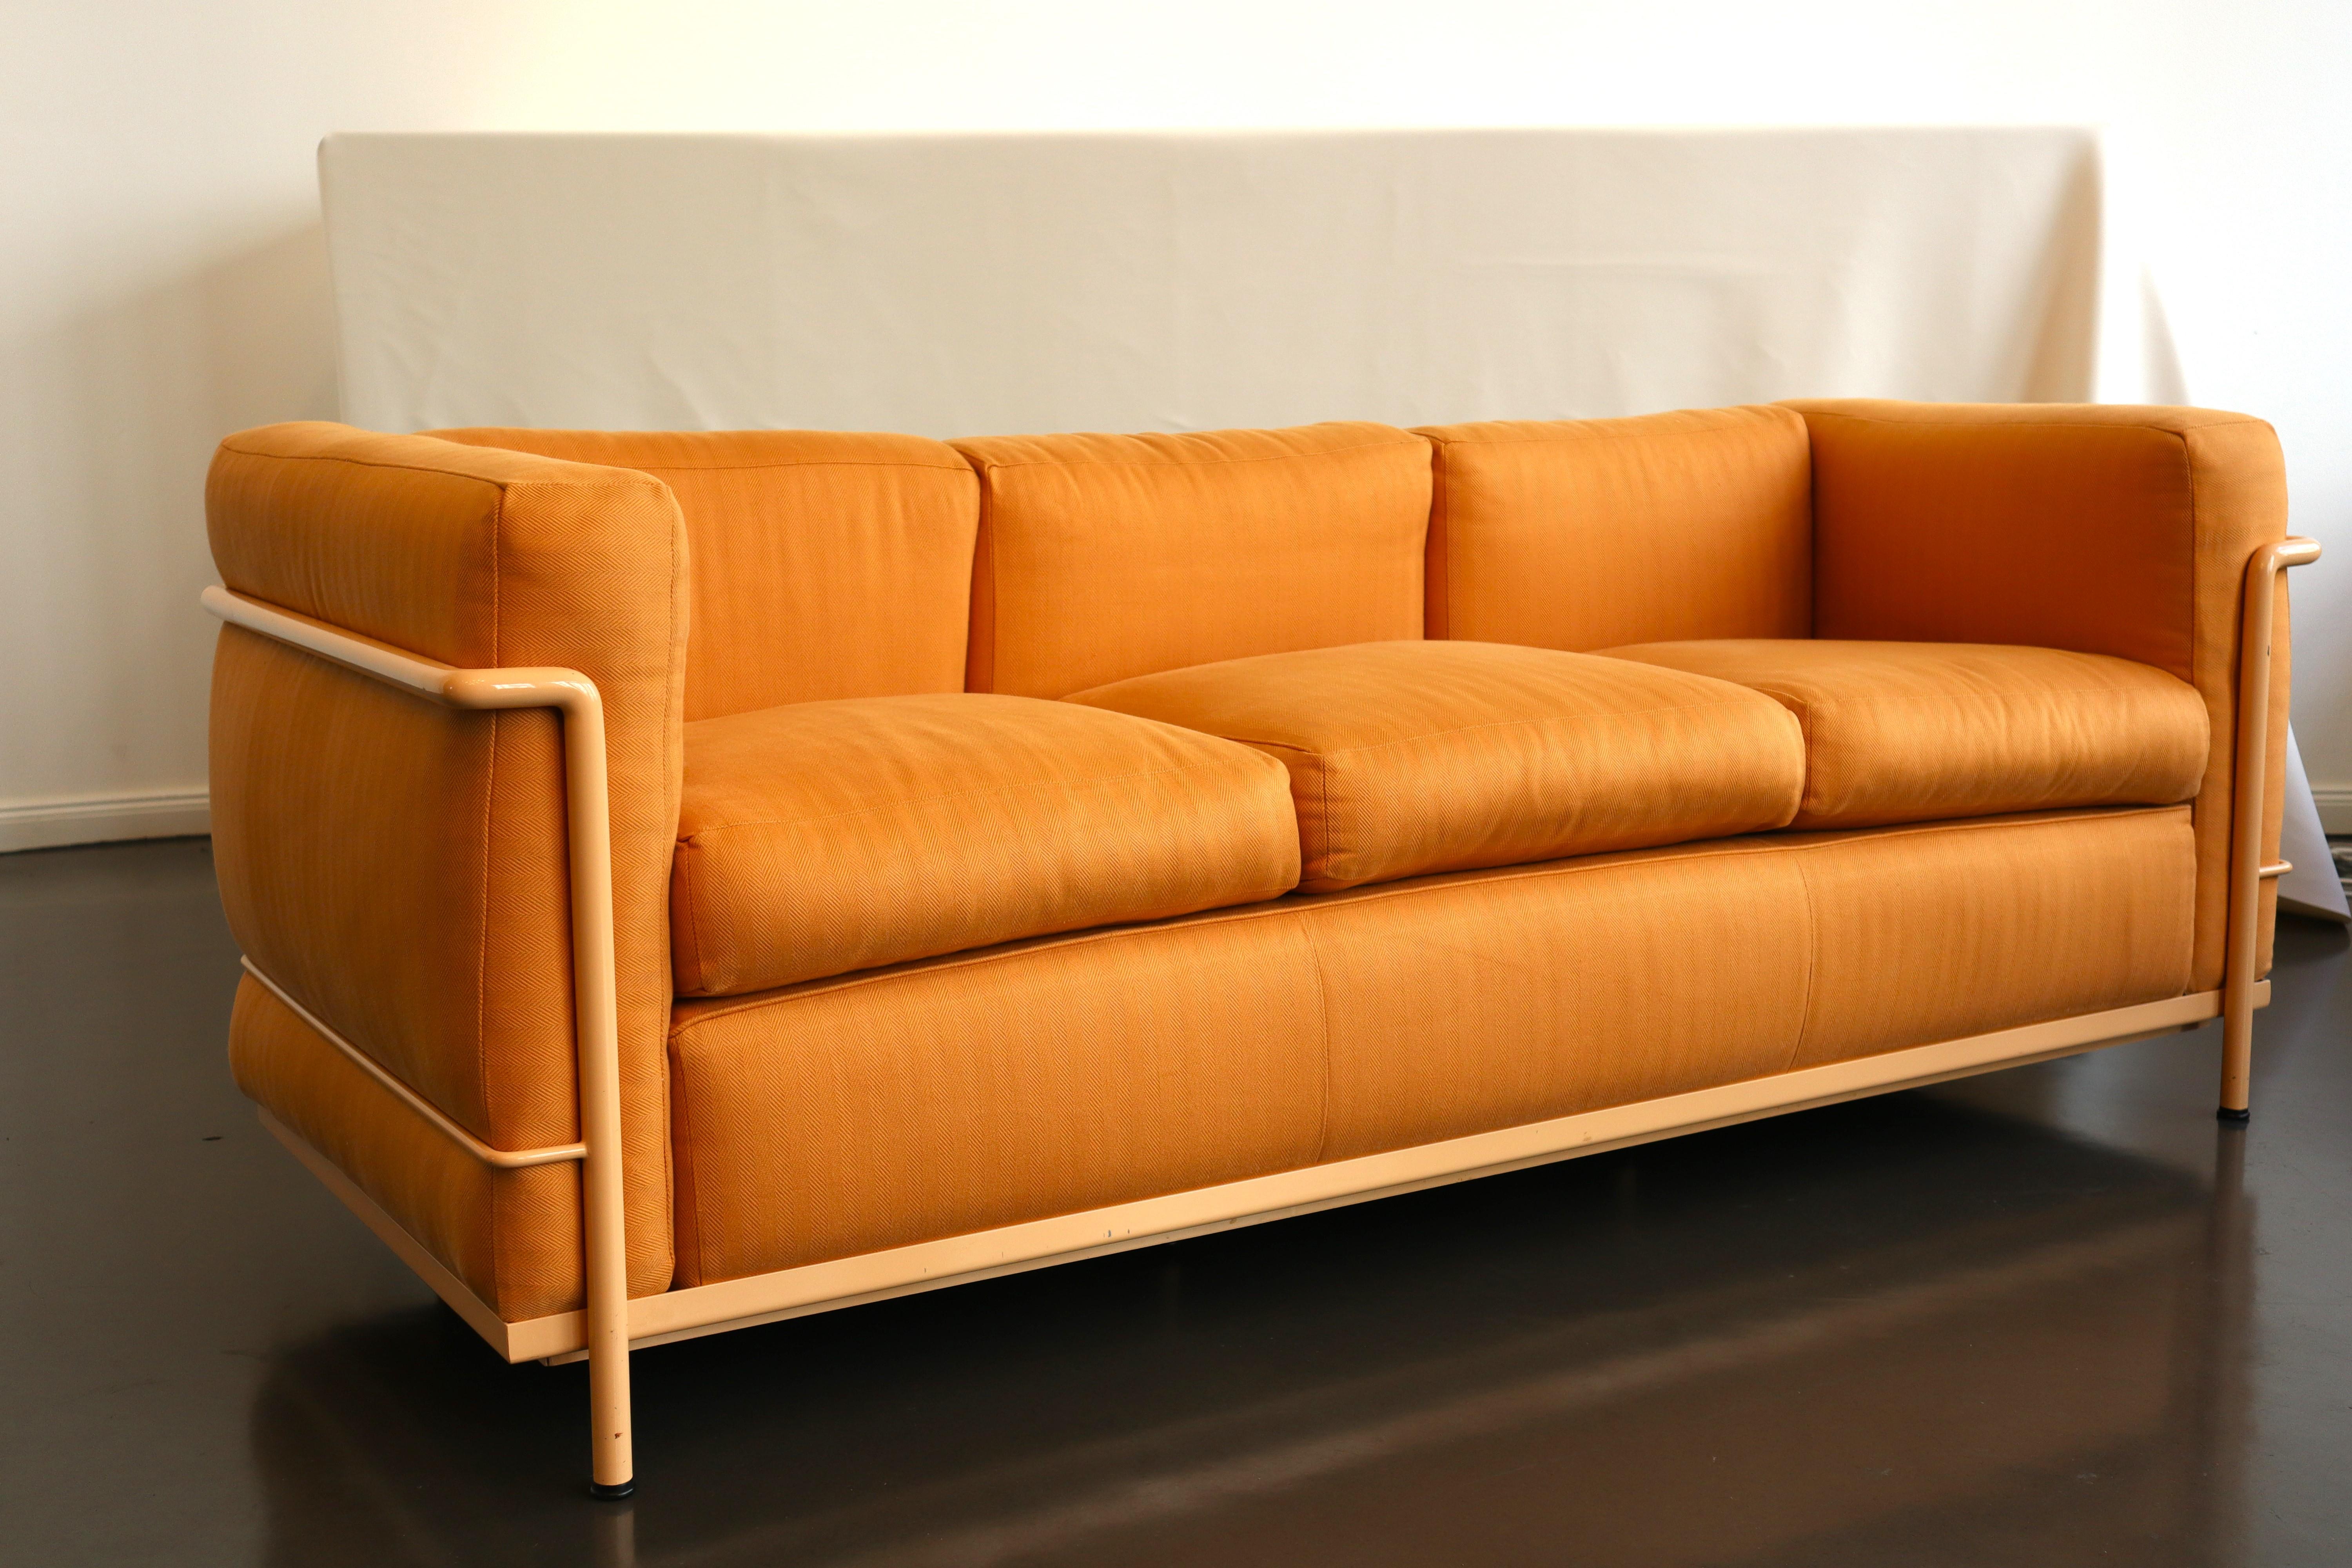 Timelessly iconic Le Corbusier LC2 three-seater sofa in peach tube steel and herringbone-patterned mango leather. Made in Italy by Cassina. Signed with serial number.

The LC2 was designed in 1928 by Le Corbusier; his cousin and colleague Pierre